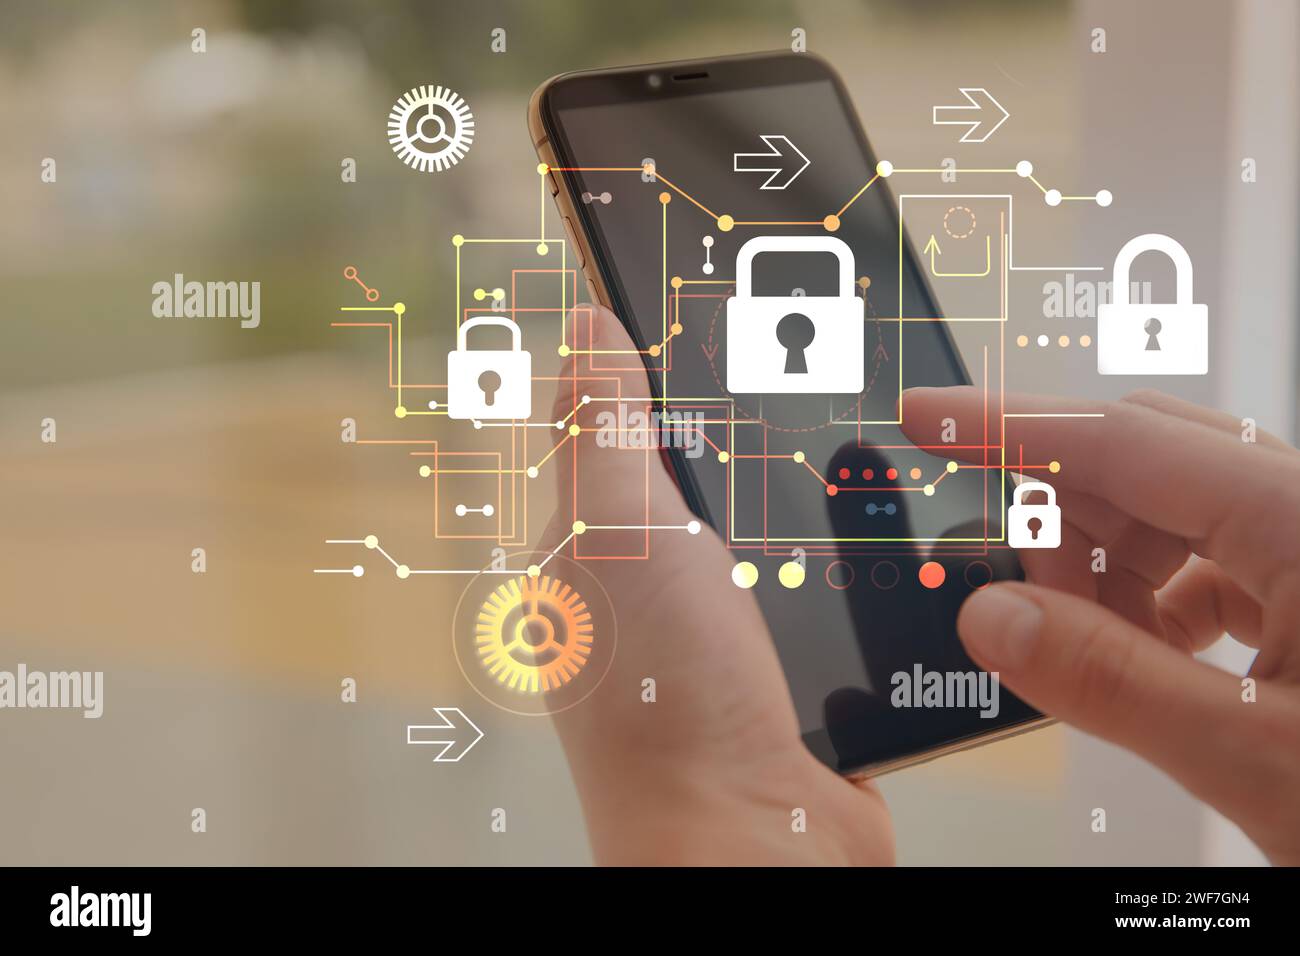 Privacy protection. Woman using smartphone indoors, closeup. Digital scheme with padlocks over device Stock Photo